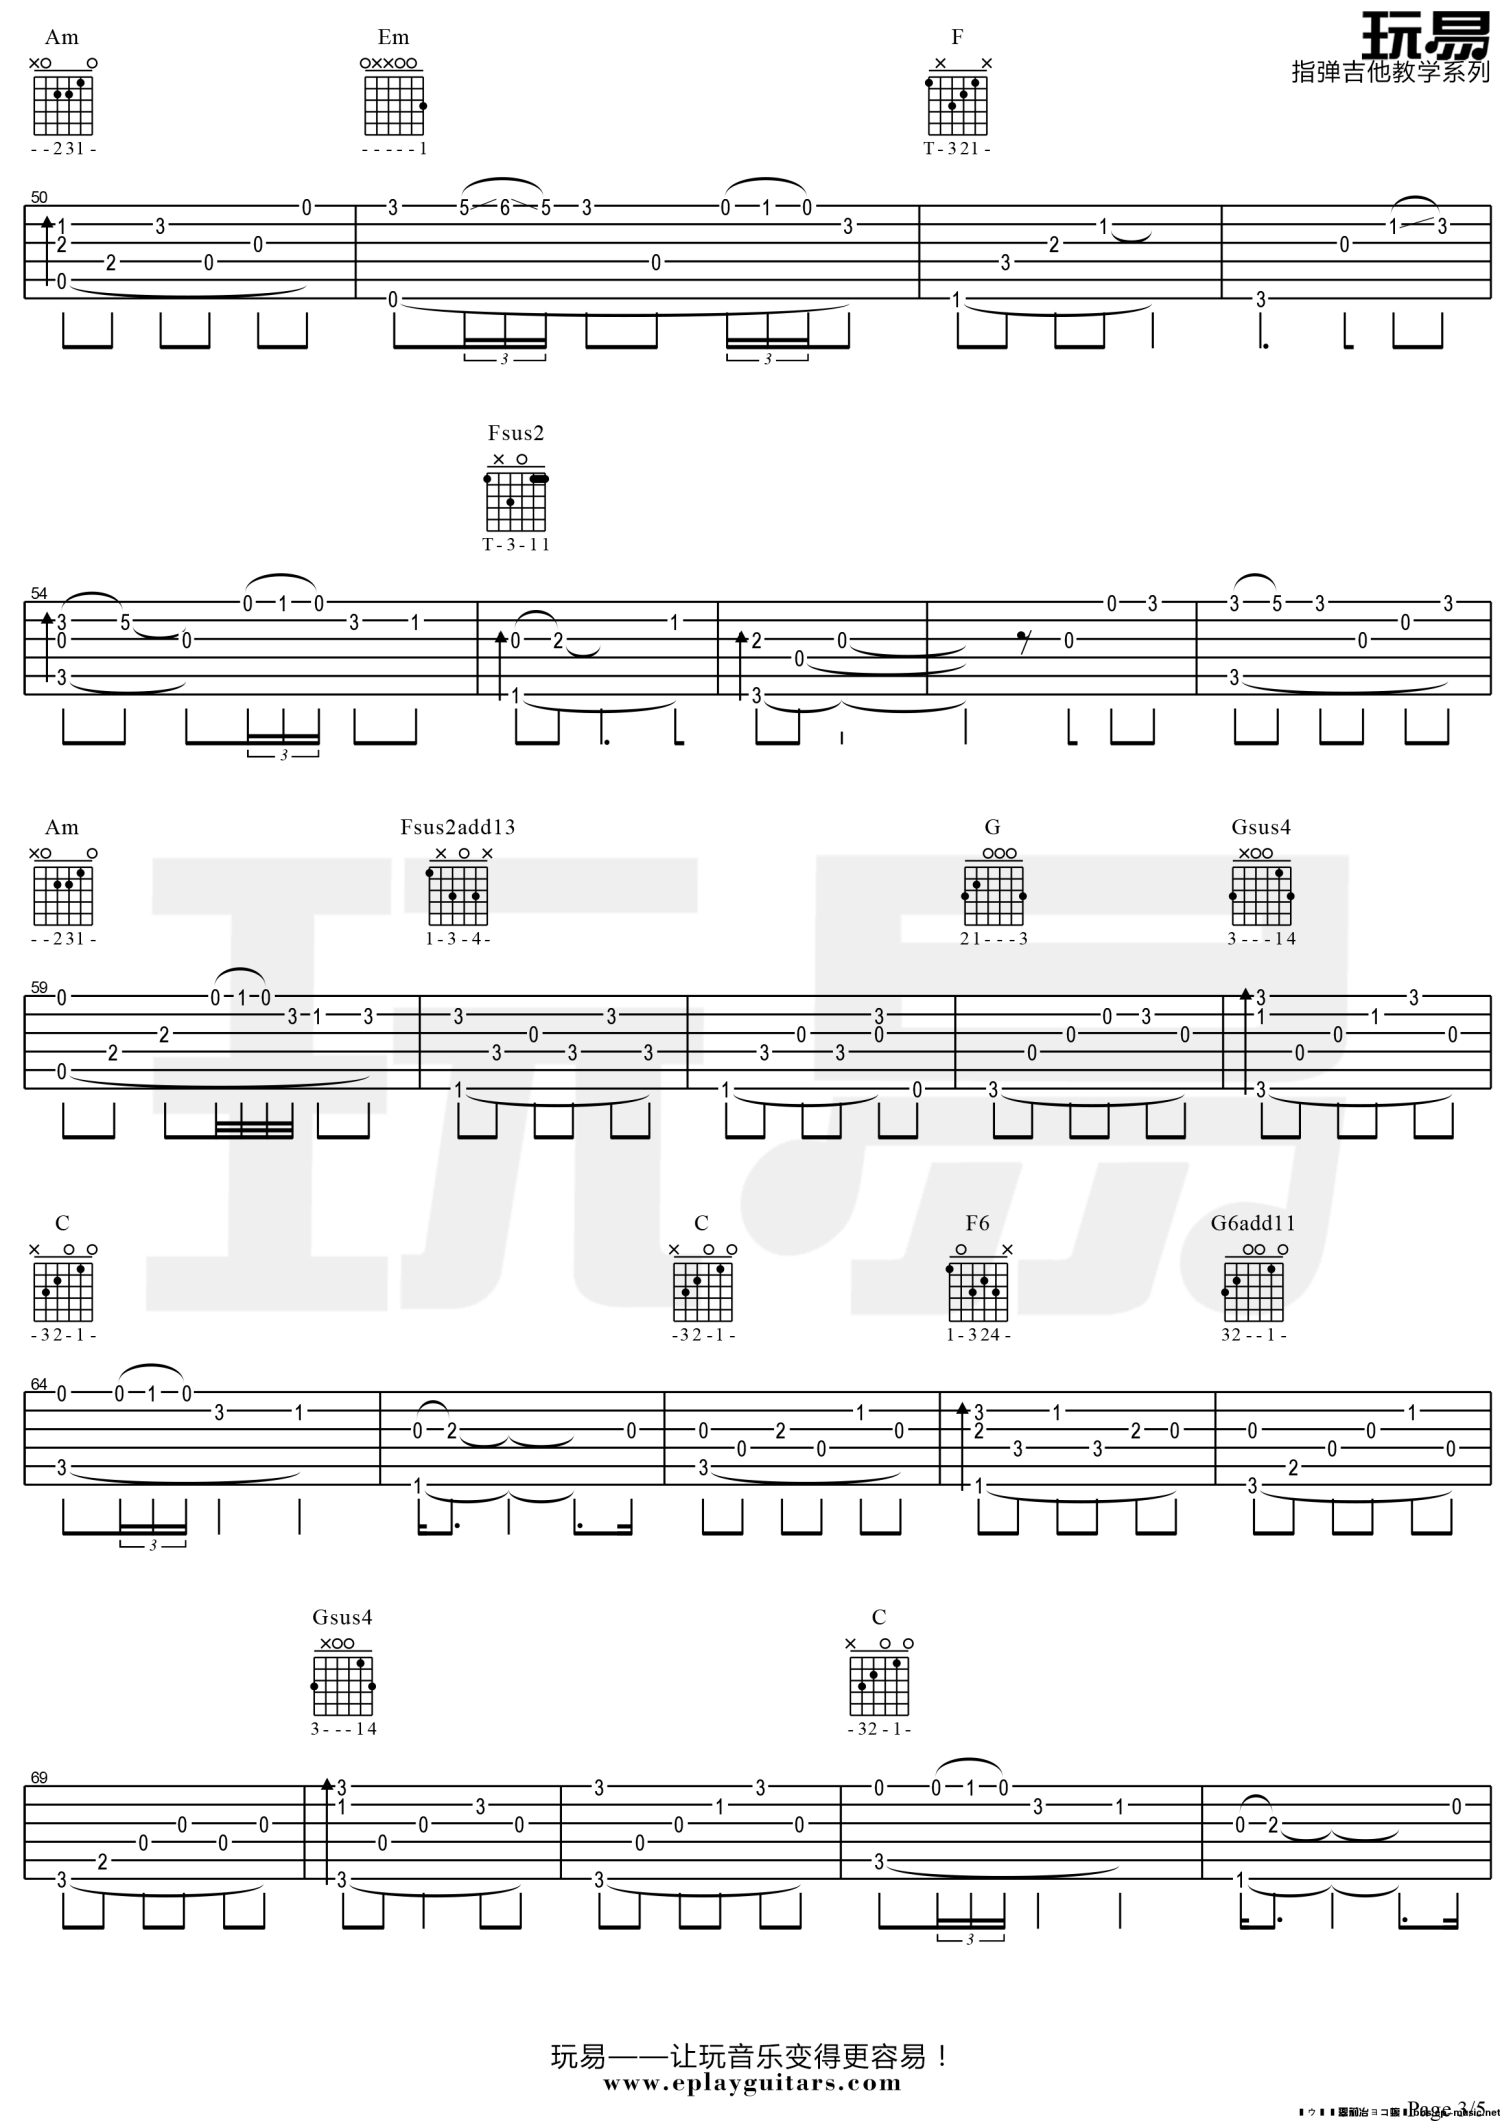 The Unforgiven for guitar. Guitar sheet music and tabs.